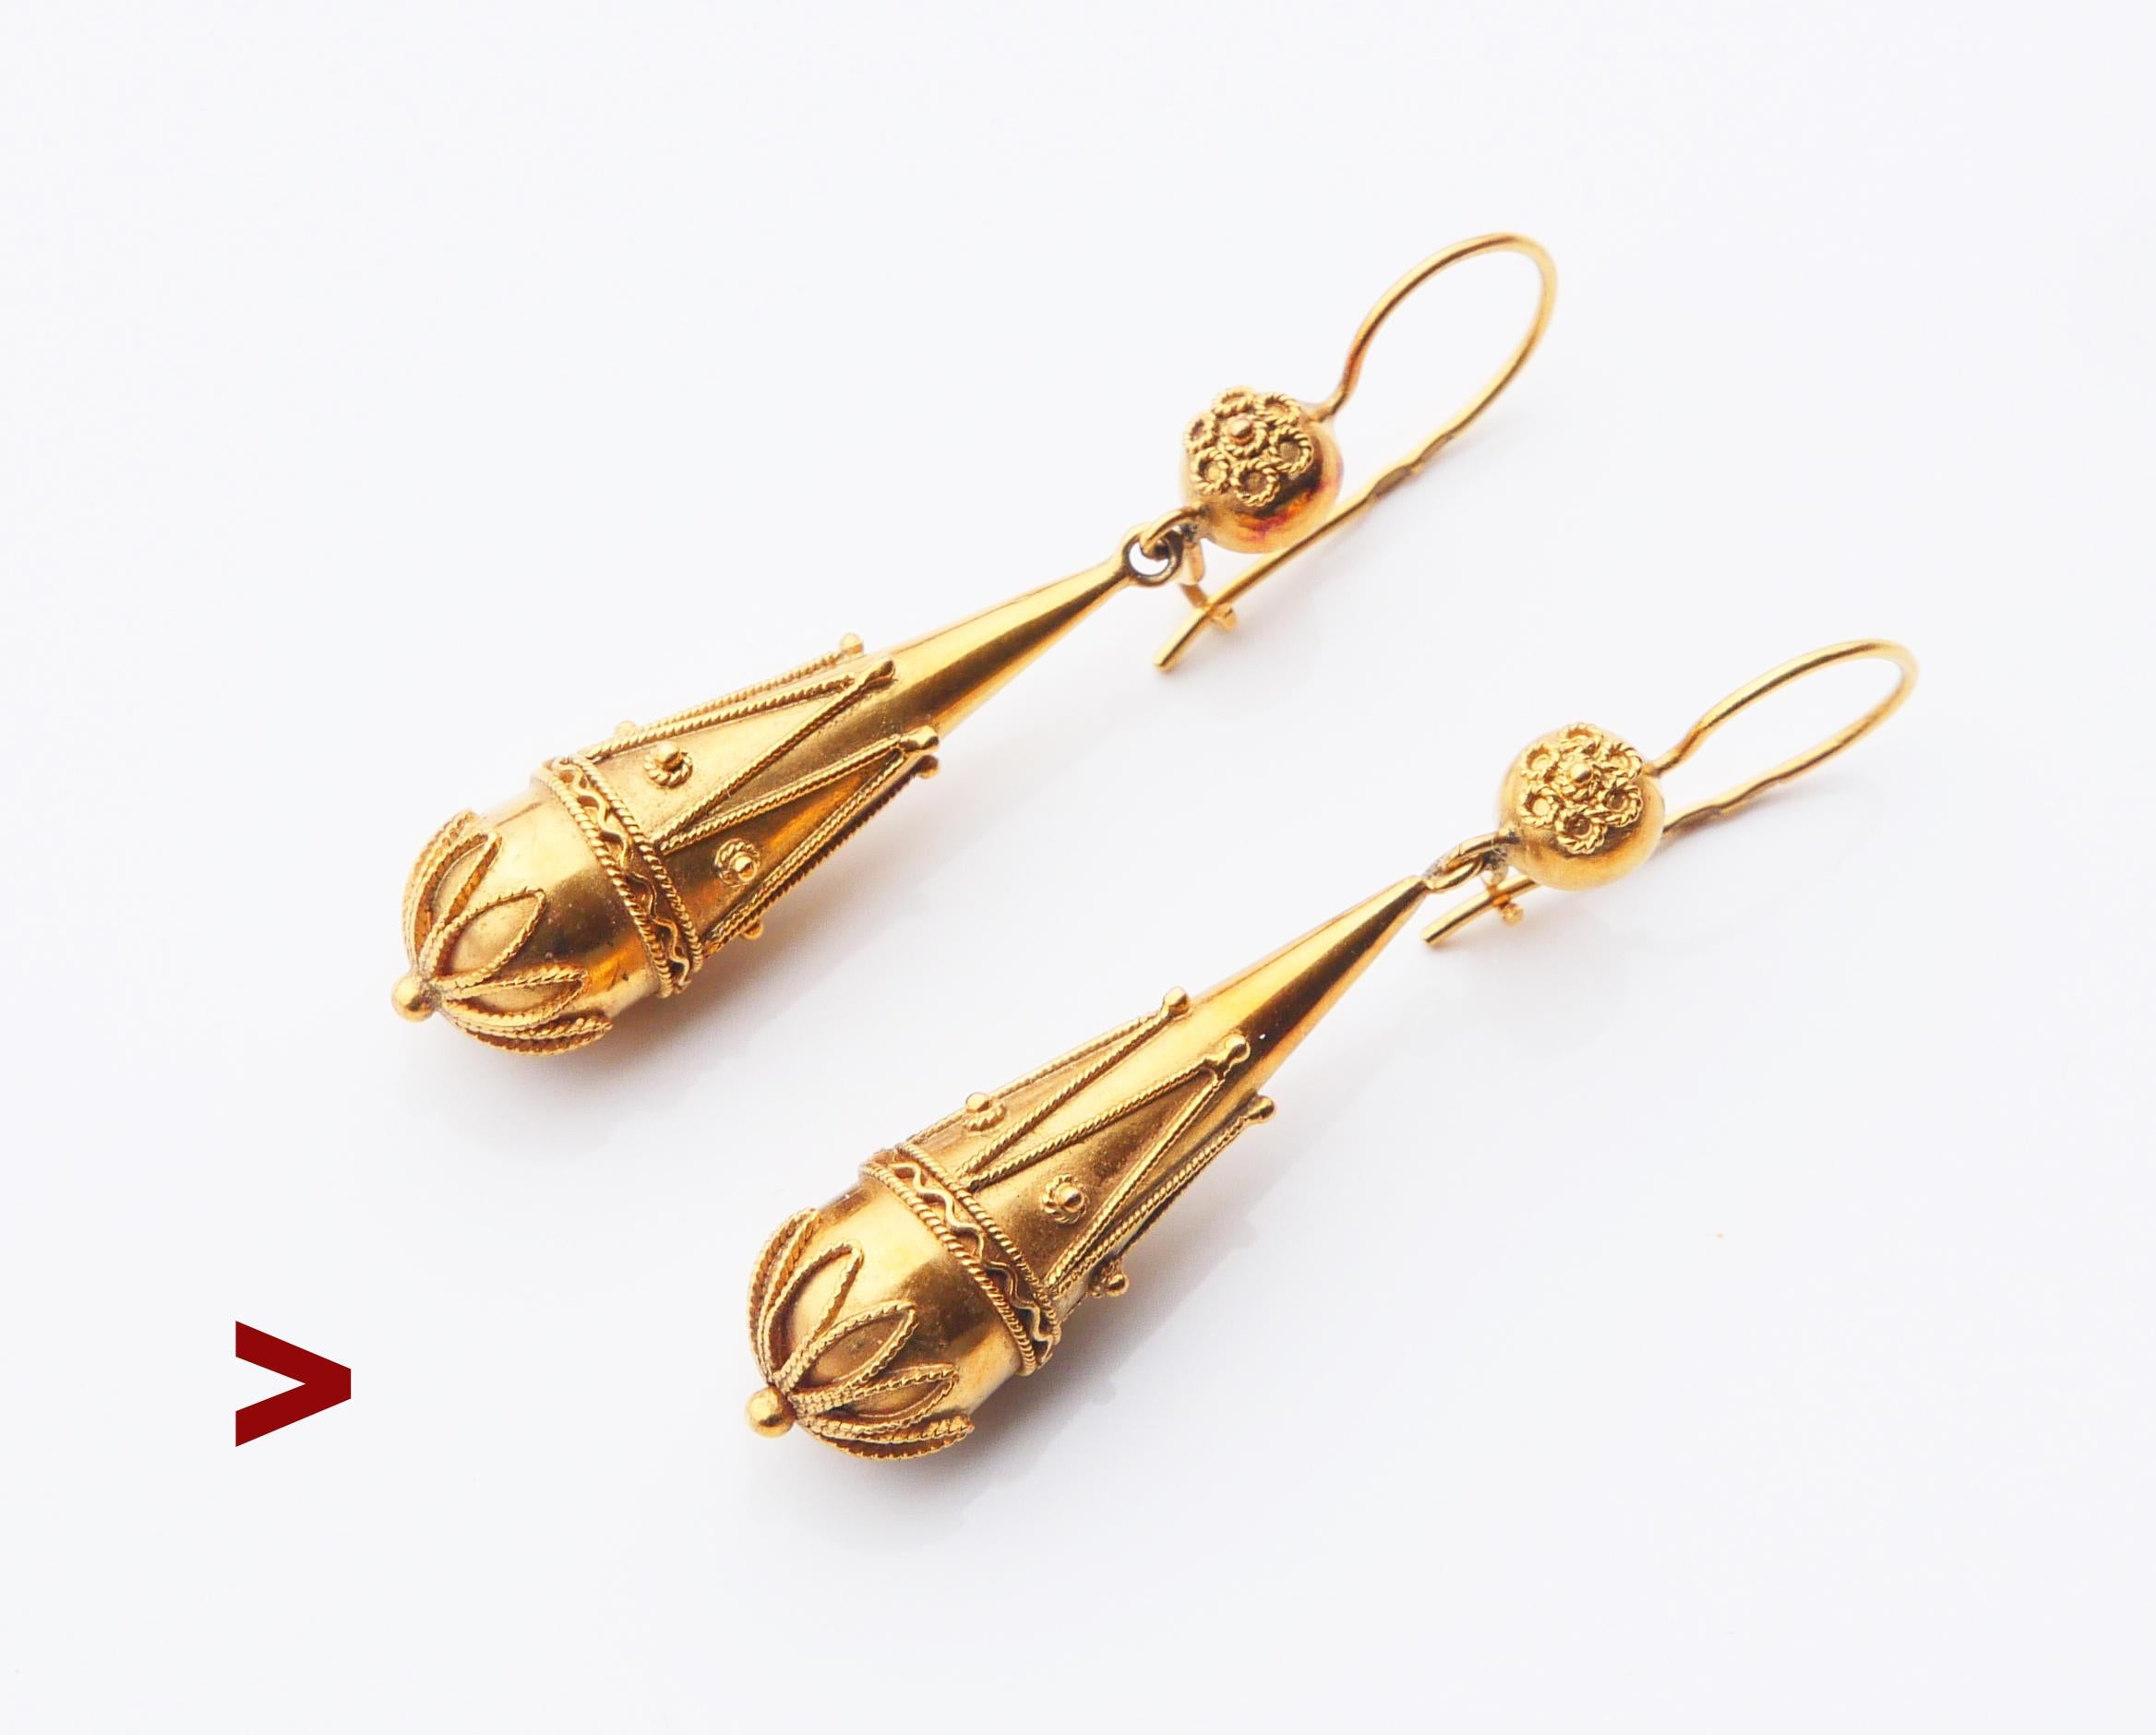 A pair of voluptuous drop shaped dangles,Etruscan styled,with filigree and granulation decorations affixed to metal base.

Both hallmarked 750, CCC, likely German, hand- made ca. 1900s- 1930s. 

Each earring is 52 mm long , Ø 9.6 mm at widest.